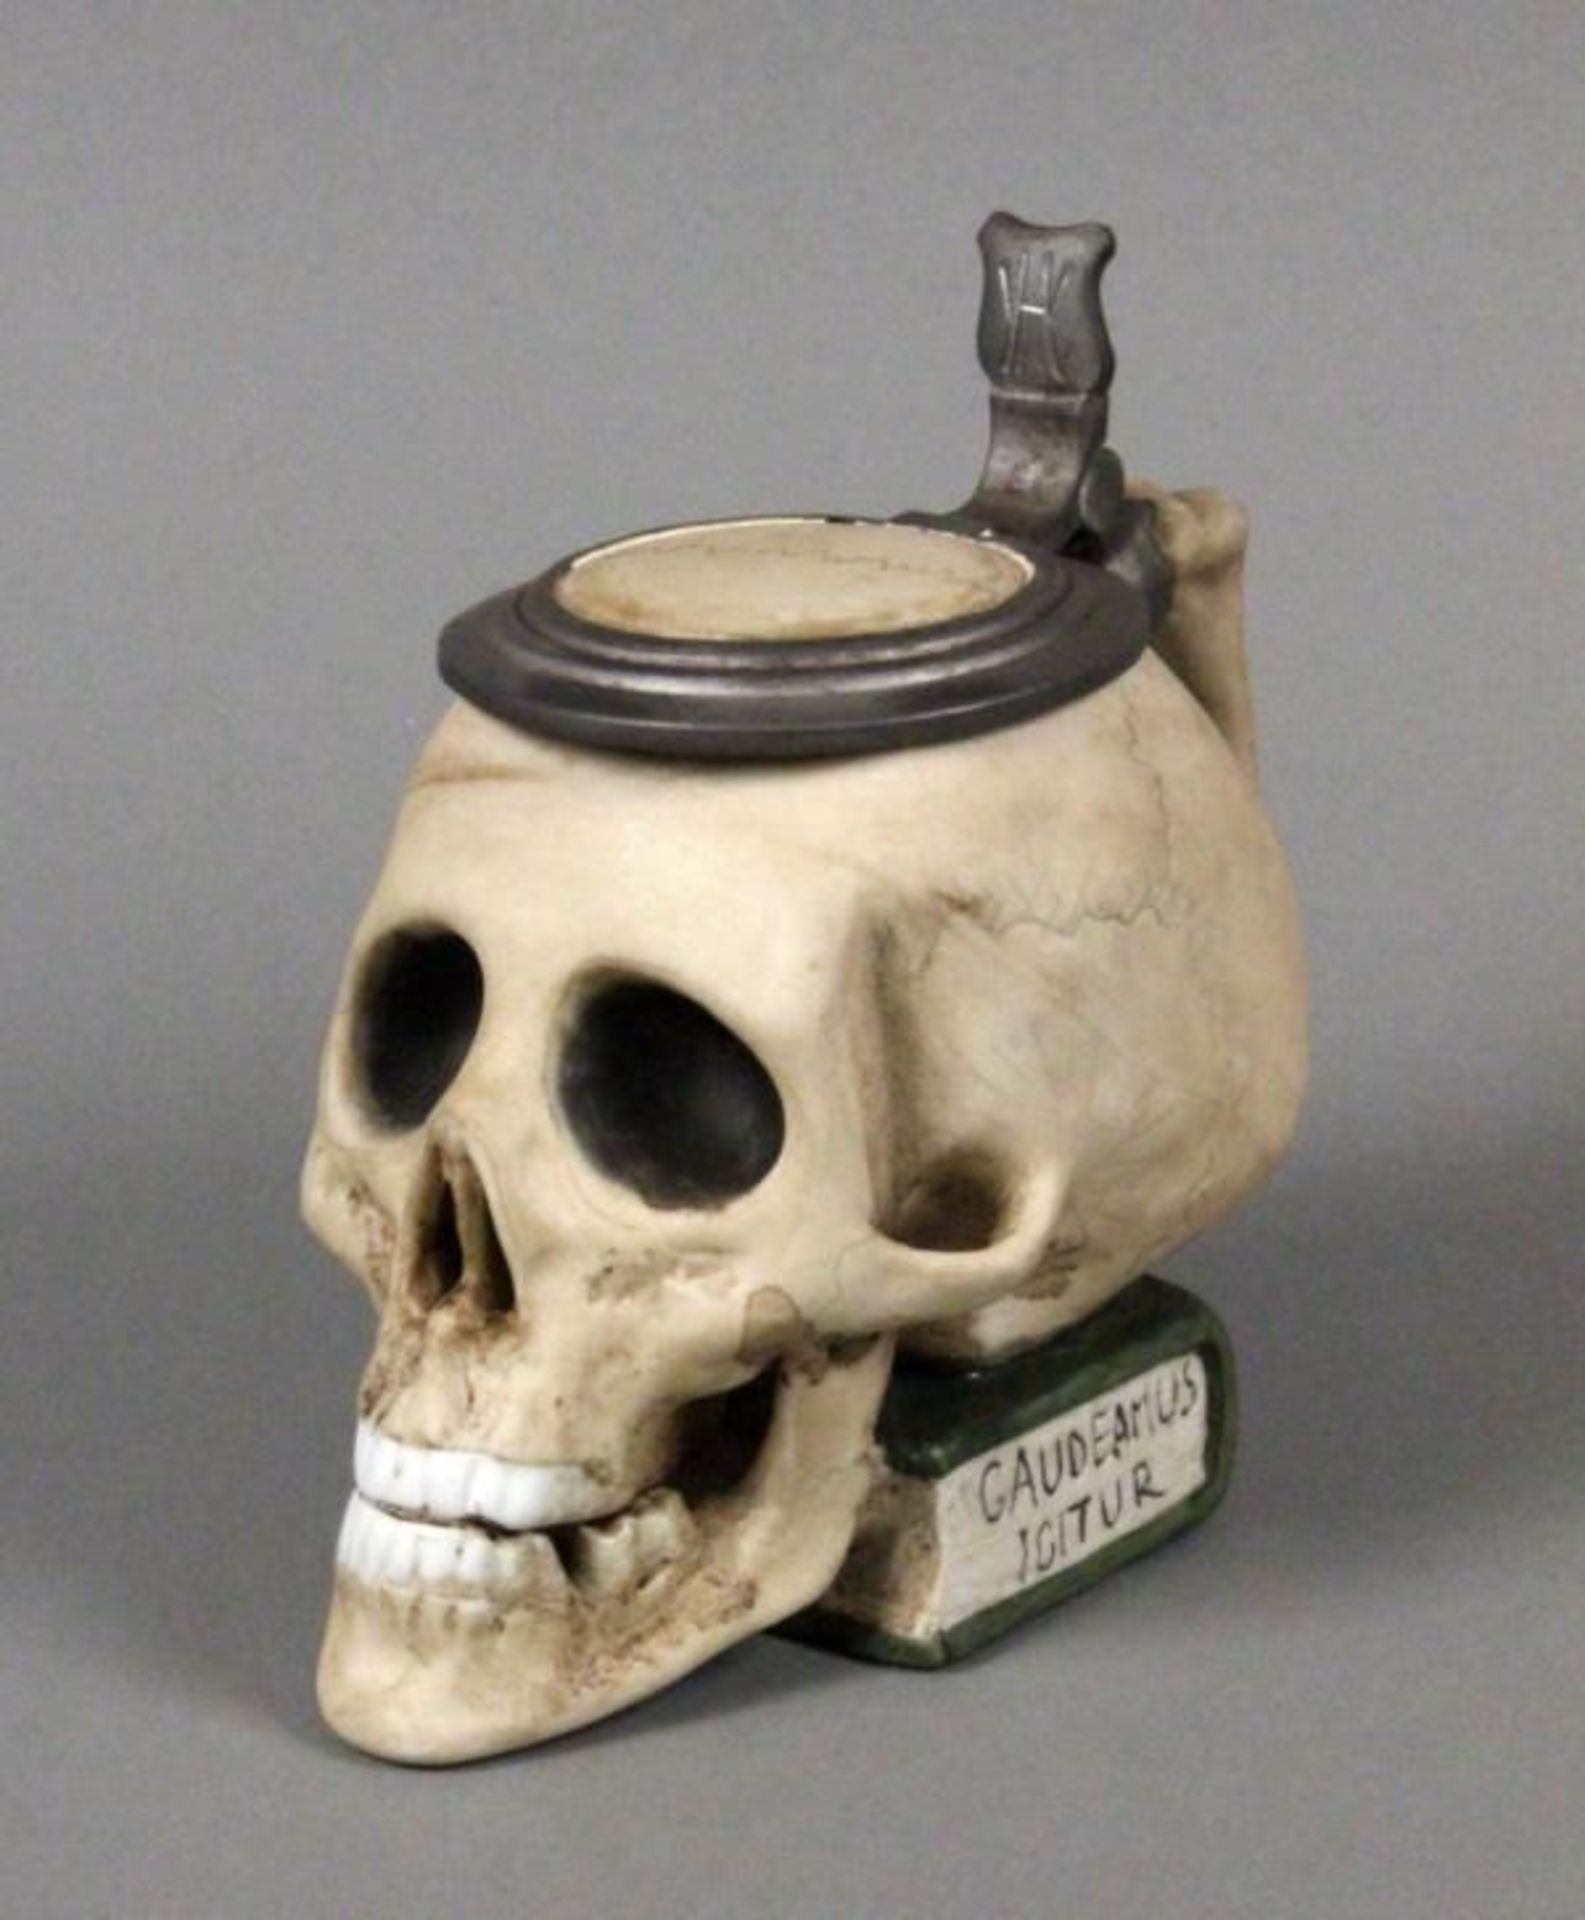 A STUDENT TANKARD IN THE FORM OF A SKULL made of porcelain with mounted pewter cover, painted,